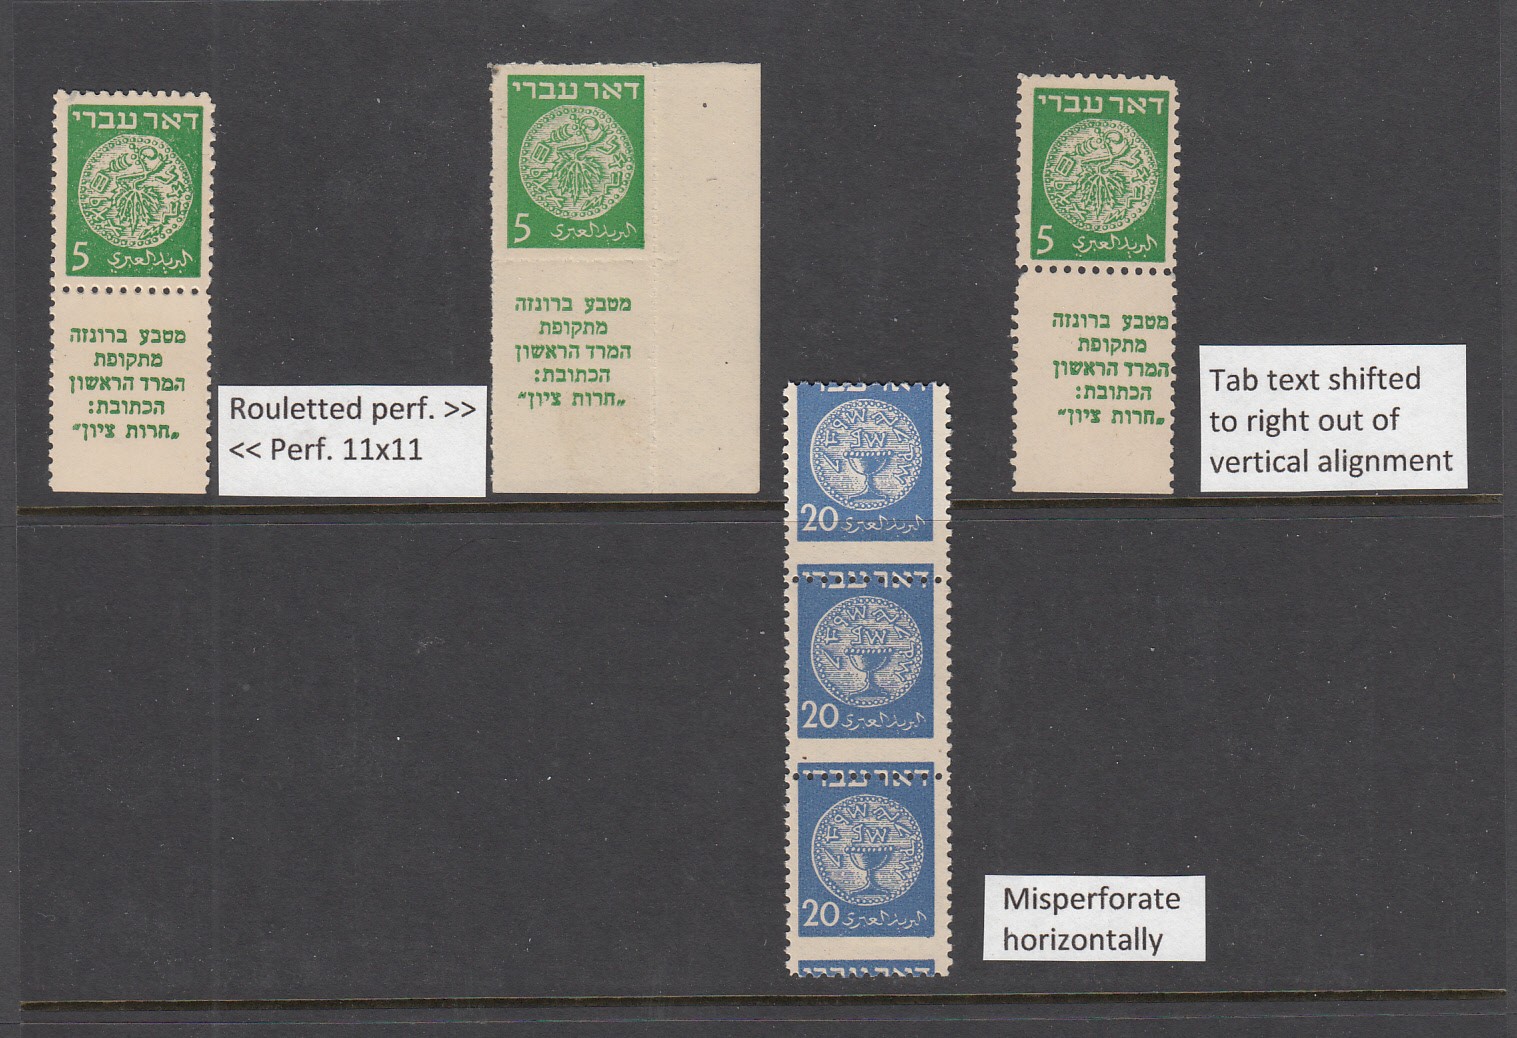 Lot 175 - Israel 1948 Stamps & Covers - Doar Ivri, First Postage Dues & Holiday issues  -  Doron Waide Mail Auction #38